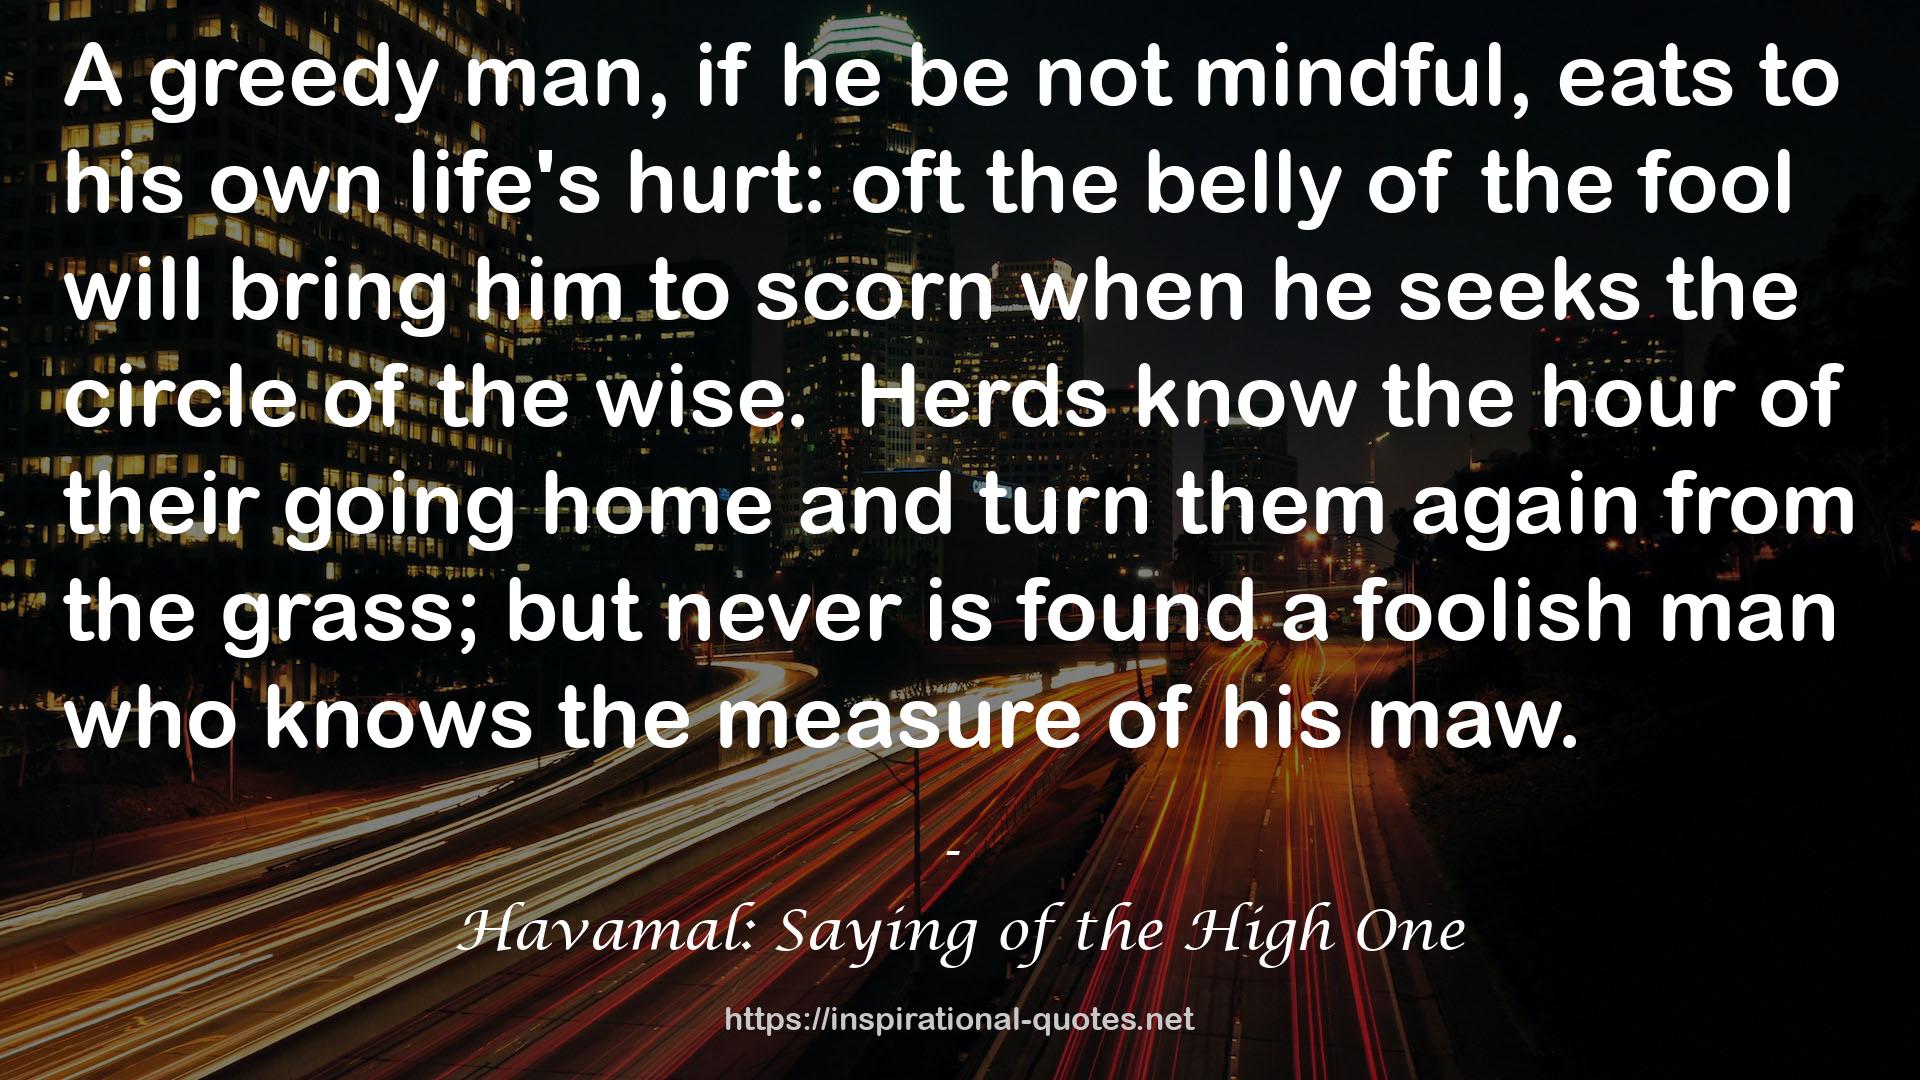 Havamal: Saying of the High One QUOTES